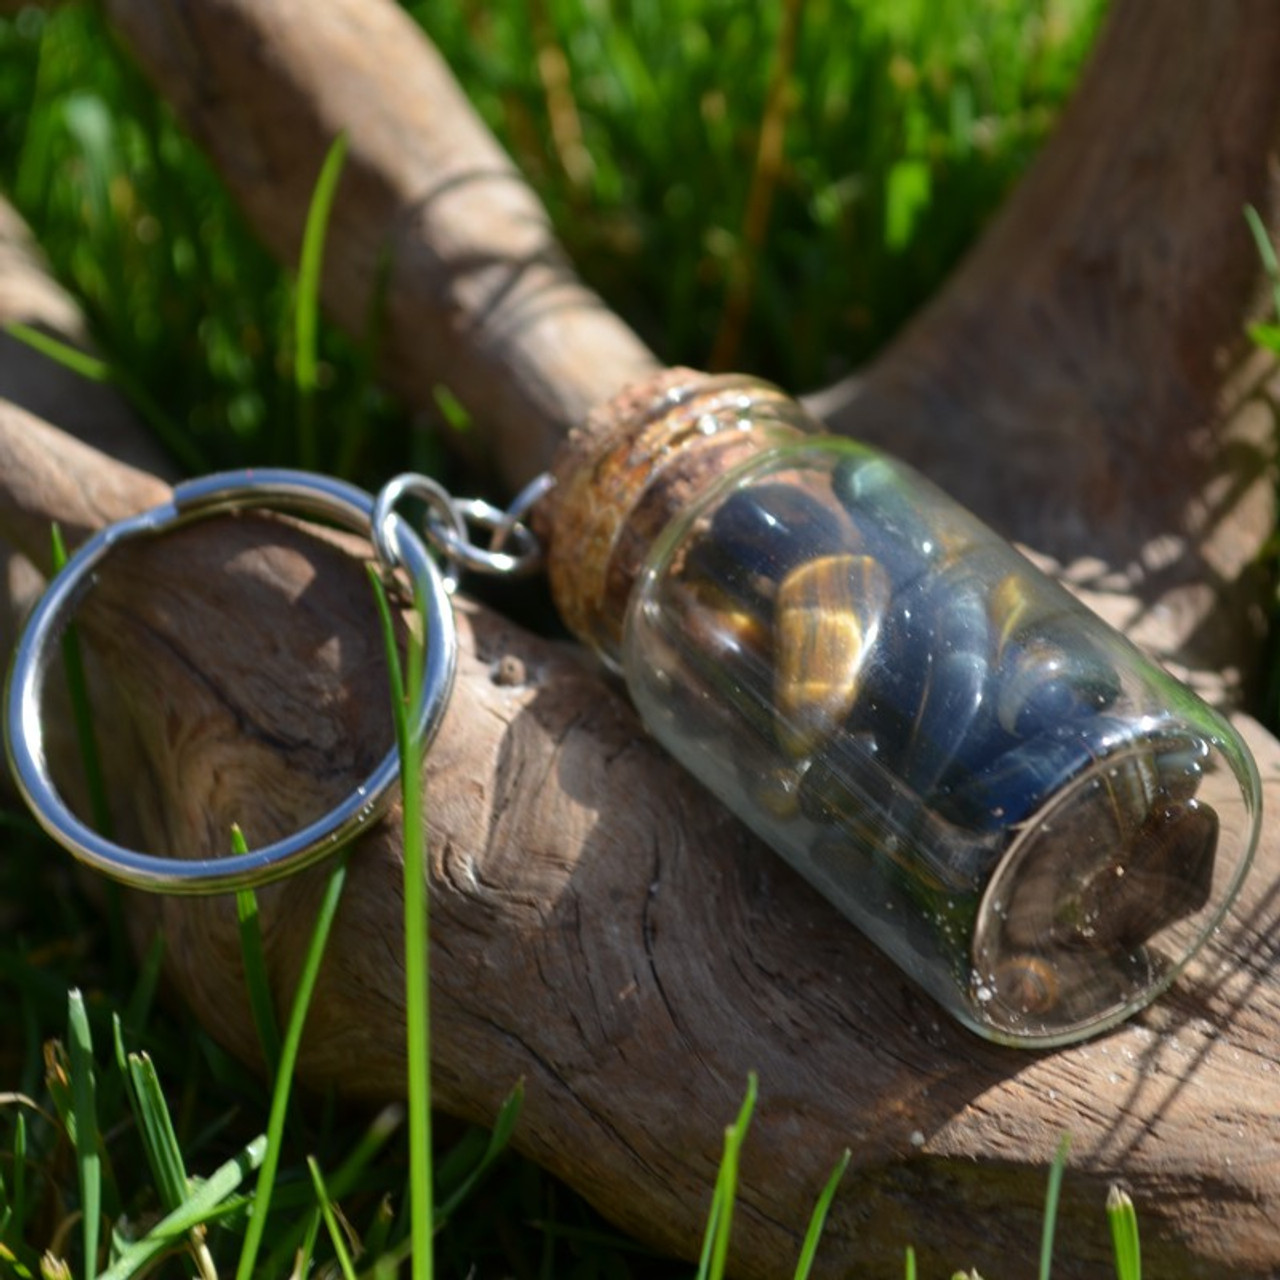 Tiger's Eye Stones in a Glass Vial Keychain